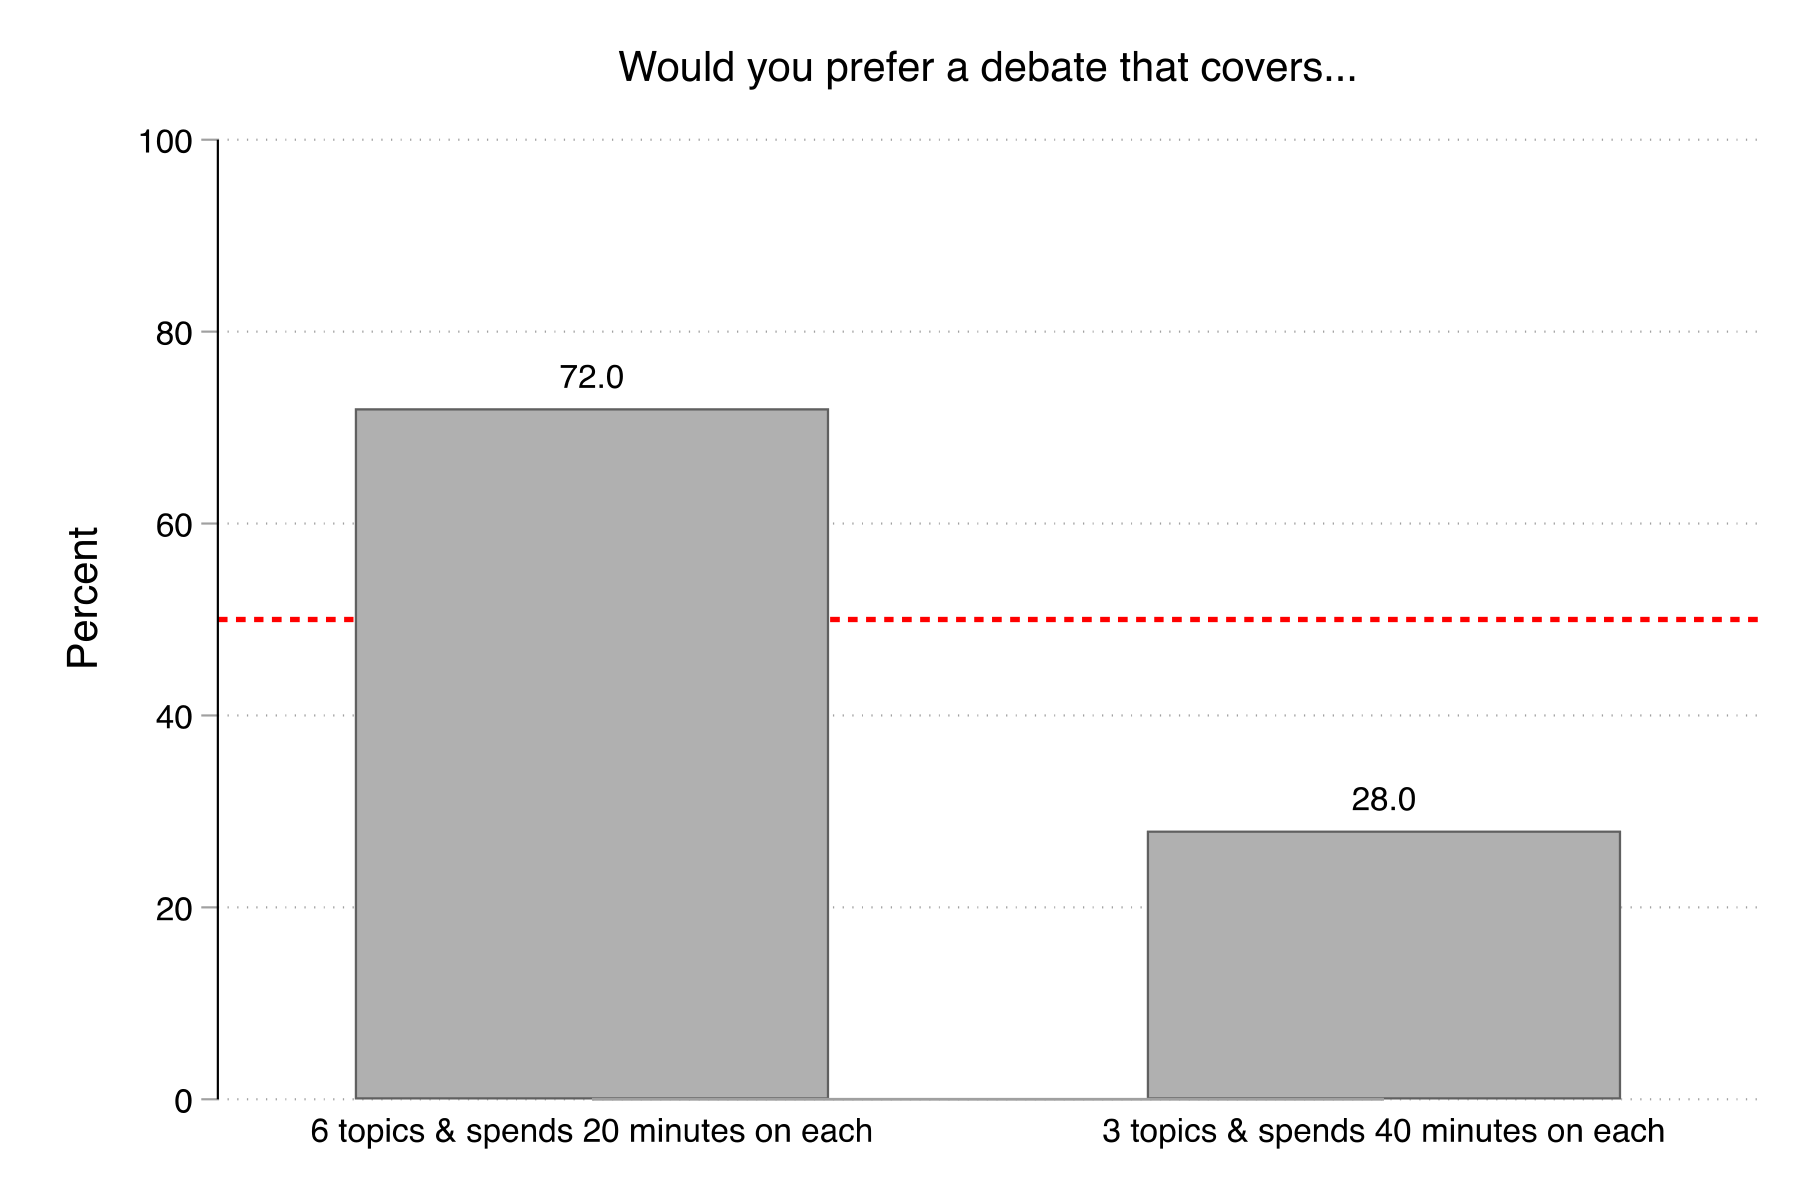 Figure 35. This figure shows the results of a binary choice question regarding the number of debate topics. A majority of participants (72%) preferred a debate that covers six topics and spends 20 minutes on each topic to a debate that covers three topics and spends 40 minutes on each topic. 